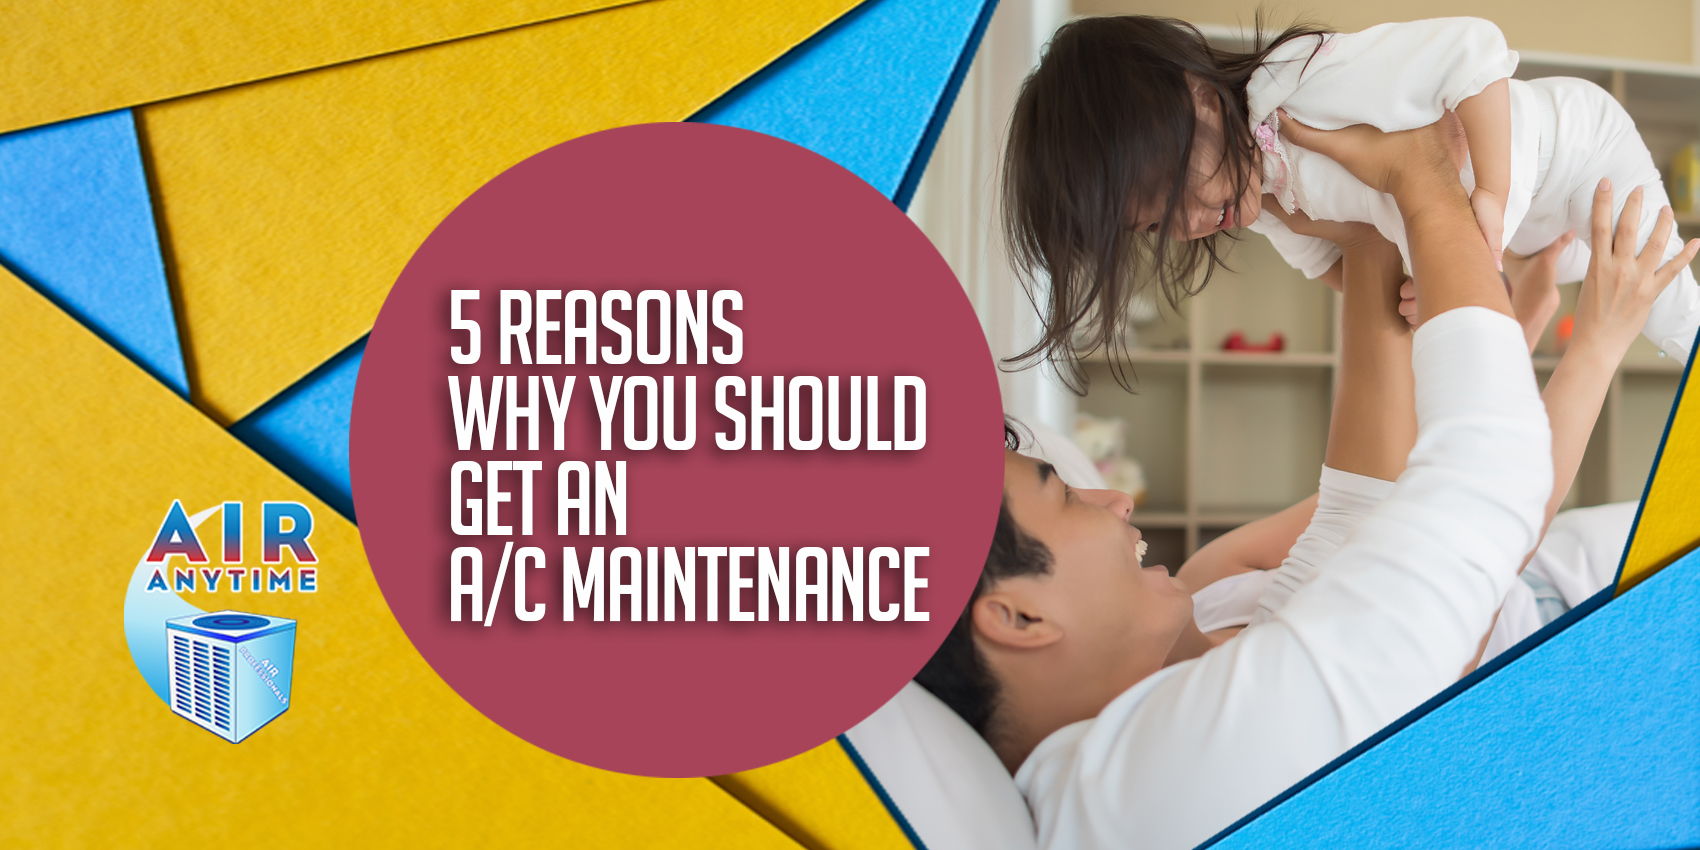 5 Reasons Why You Should Get An A/C Maintenance